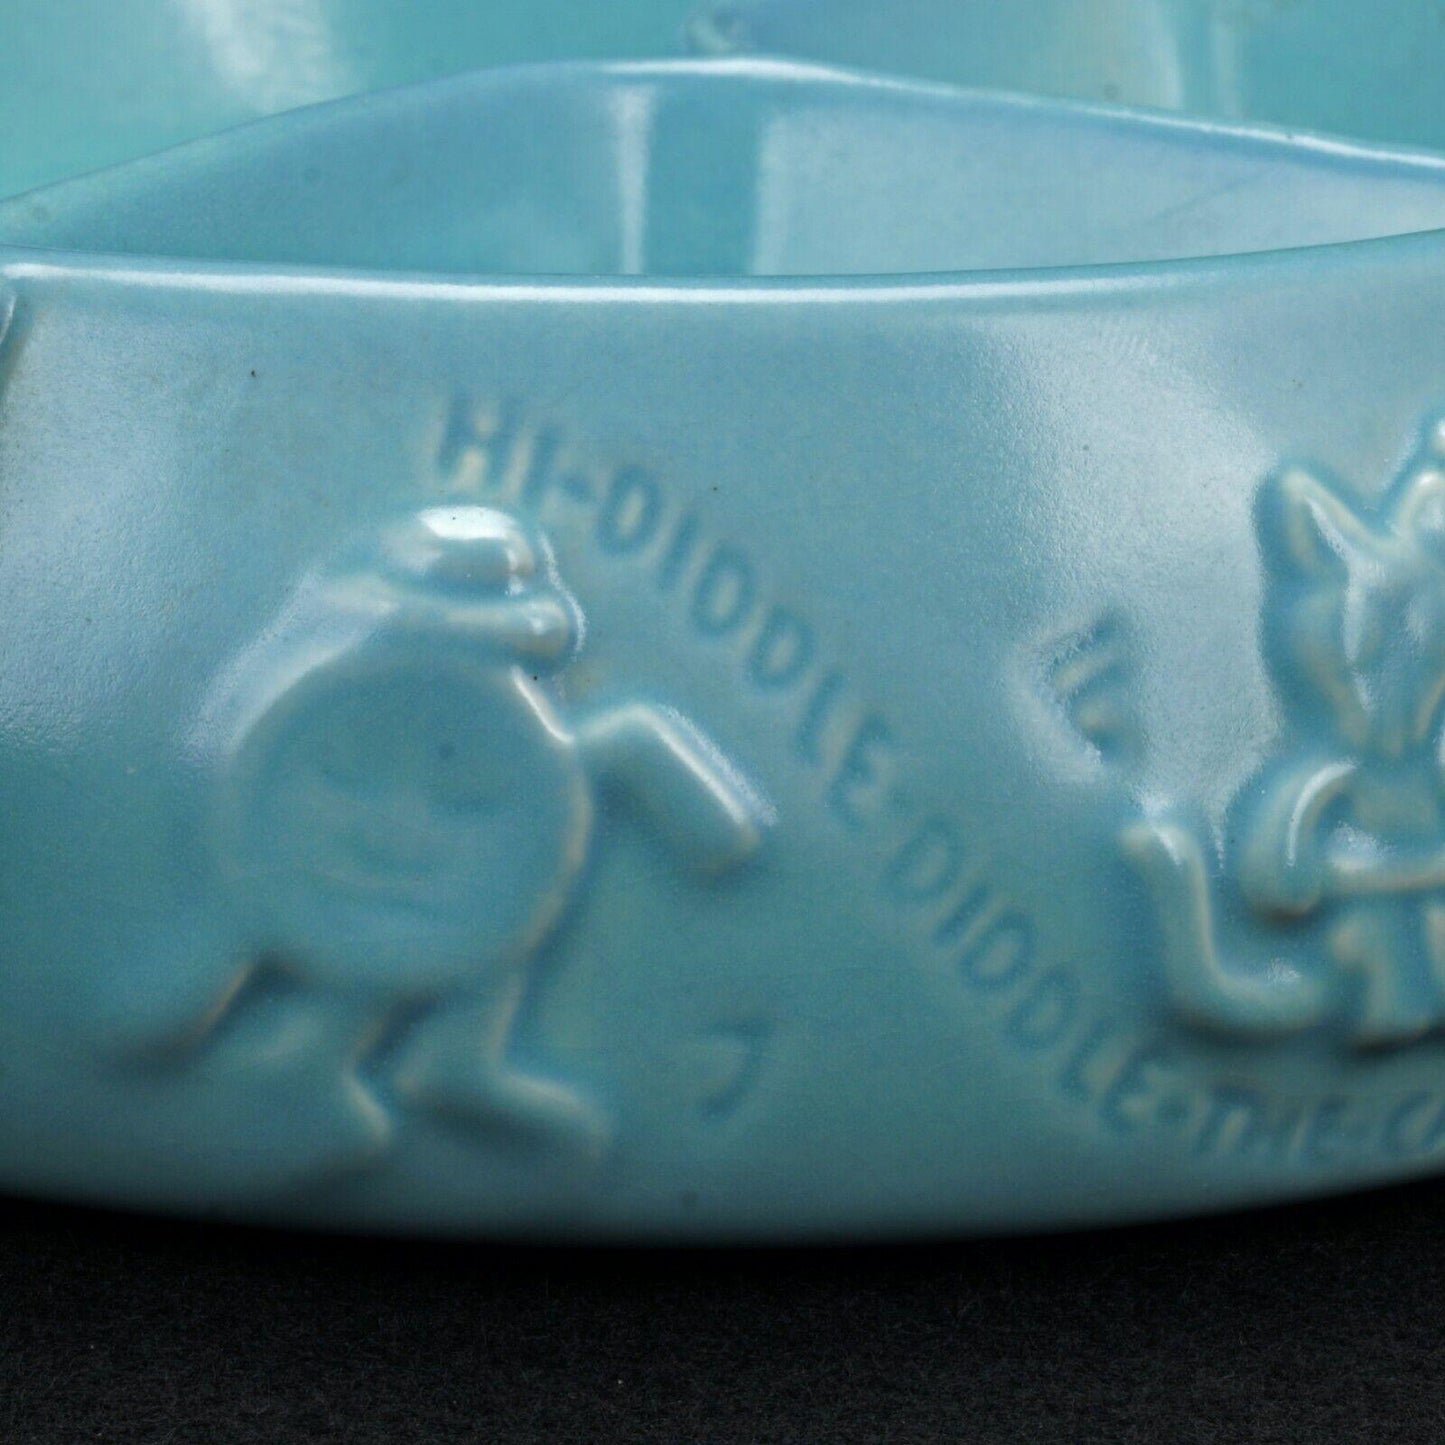 Mid-century Hankscraft Turquoise Nursery Rhyme Baby Food Warming Dish - Bear and Raven Antiques